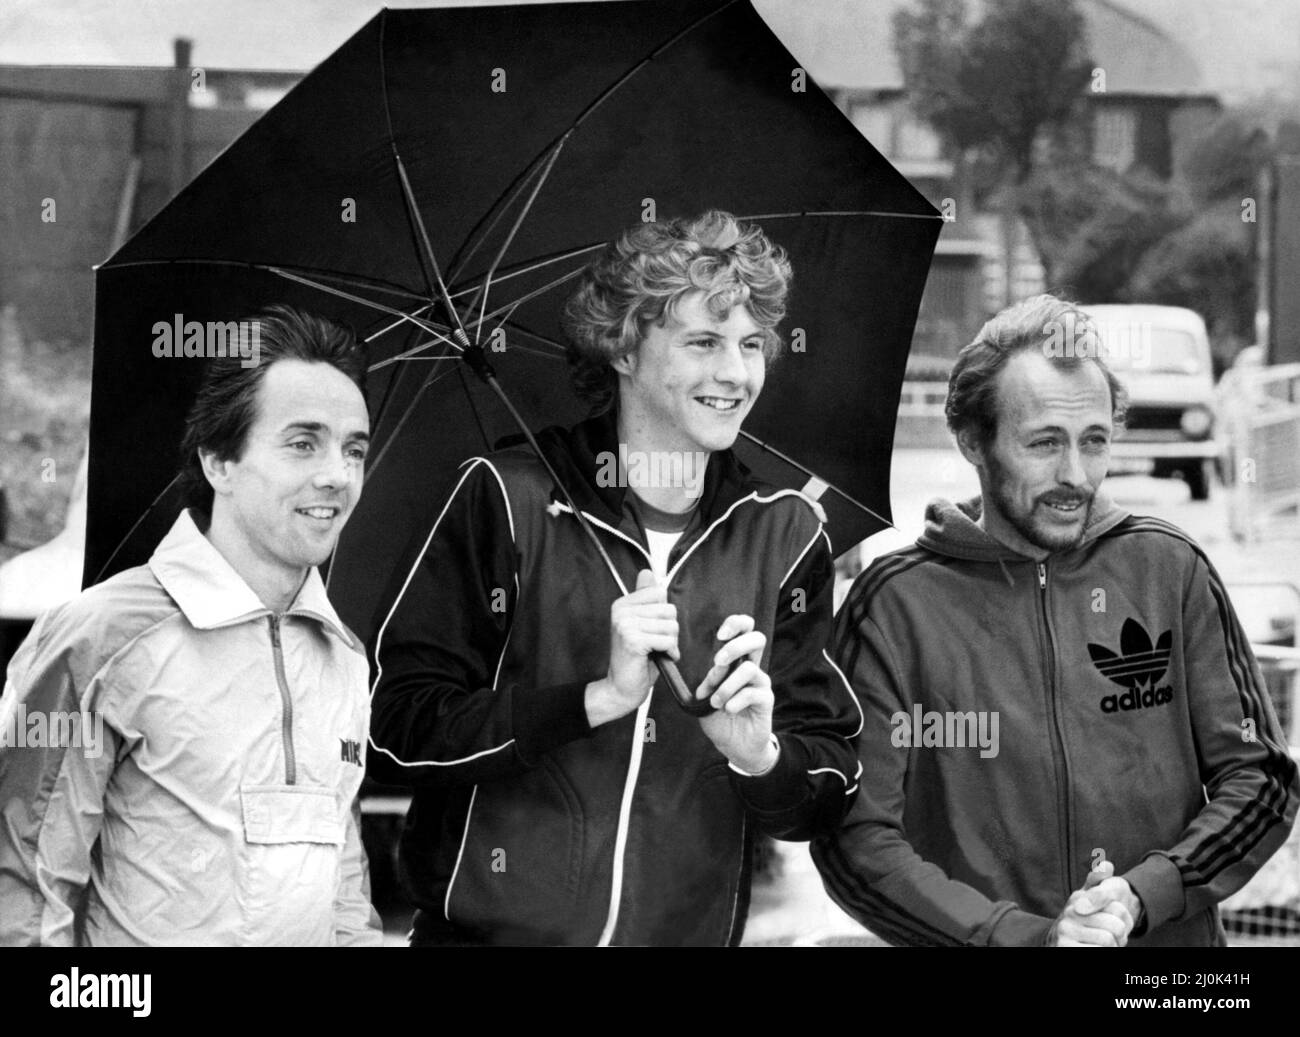 Athlete Steve Cram  Athletes Barry Smith, Steve Cram and Mike McLeod keep out of the rain at Gateshead, in preparation for the forthcoming 3,000 metres race on Sunday - picture dated 23 July 1981 Stock Photo